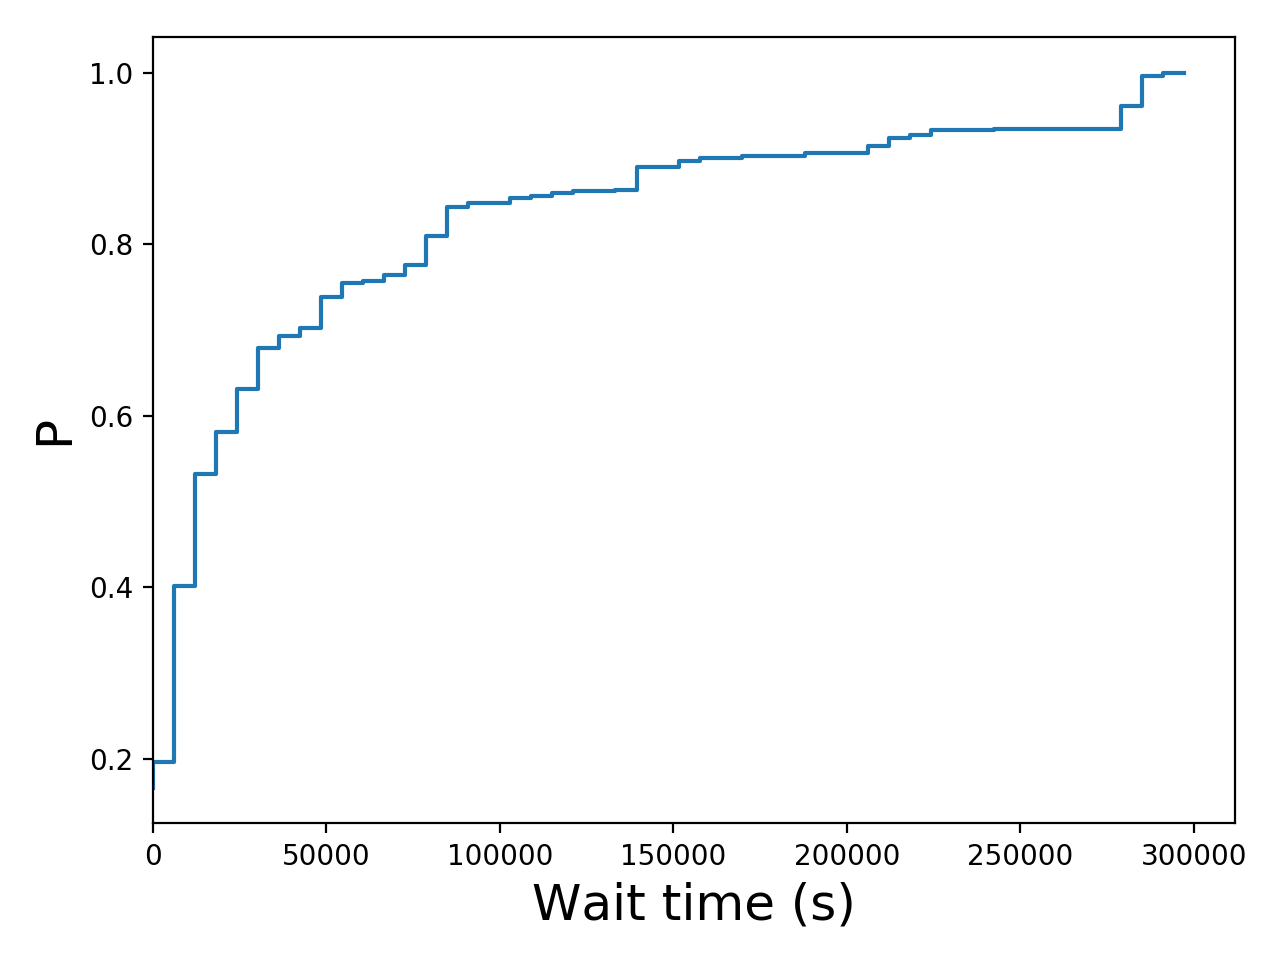 Task wait time CDF graph for the Pegasus_P6b trace.